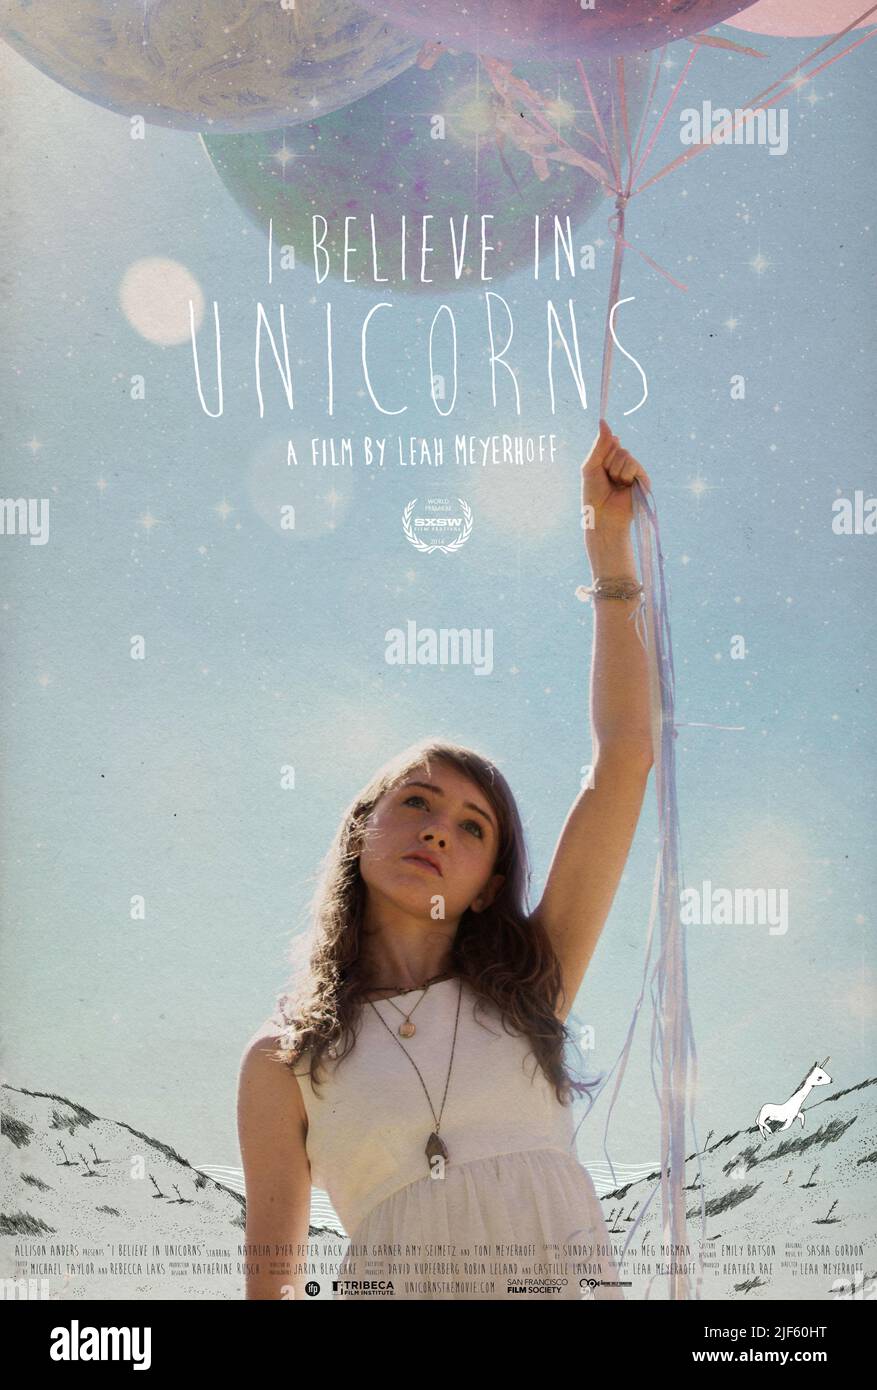 NATALIA DYER in I BELIEVE IN UNICORNS (2014), directed by LEAH MEYERHOFF. Credit: DTC Grip & Electric / Album Stock Photo